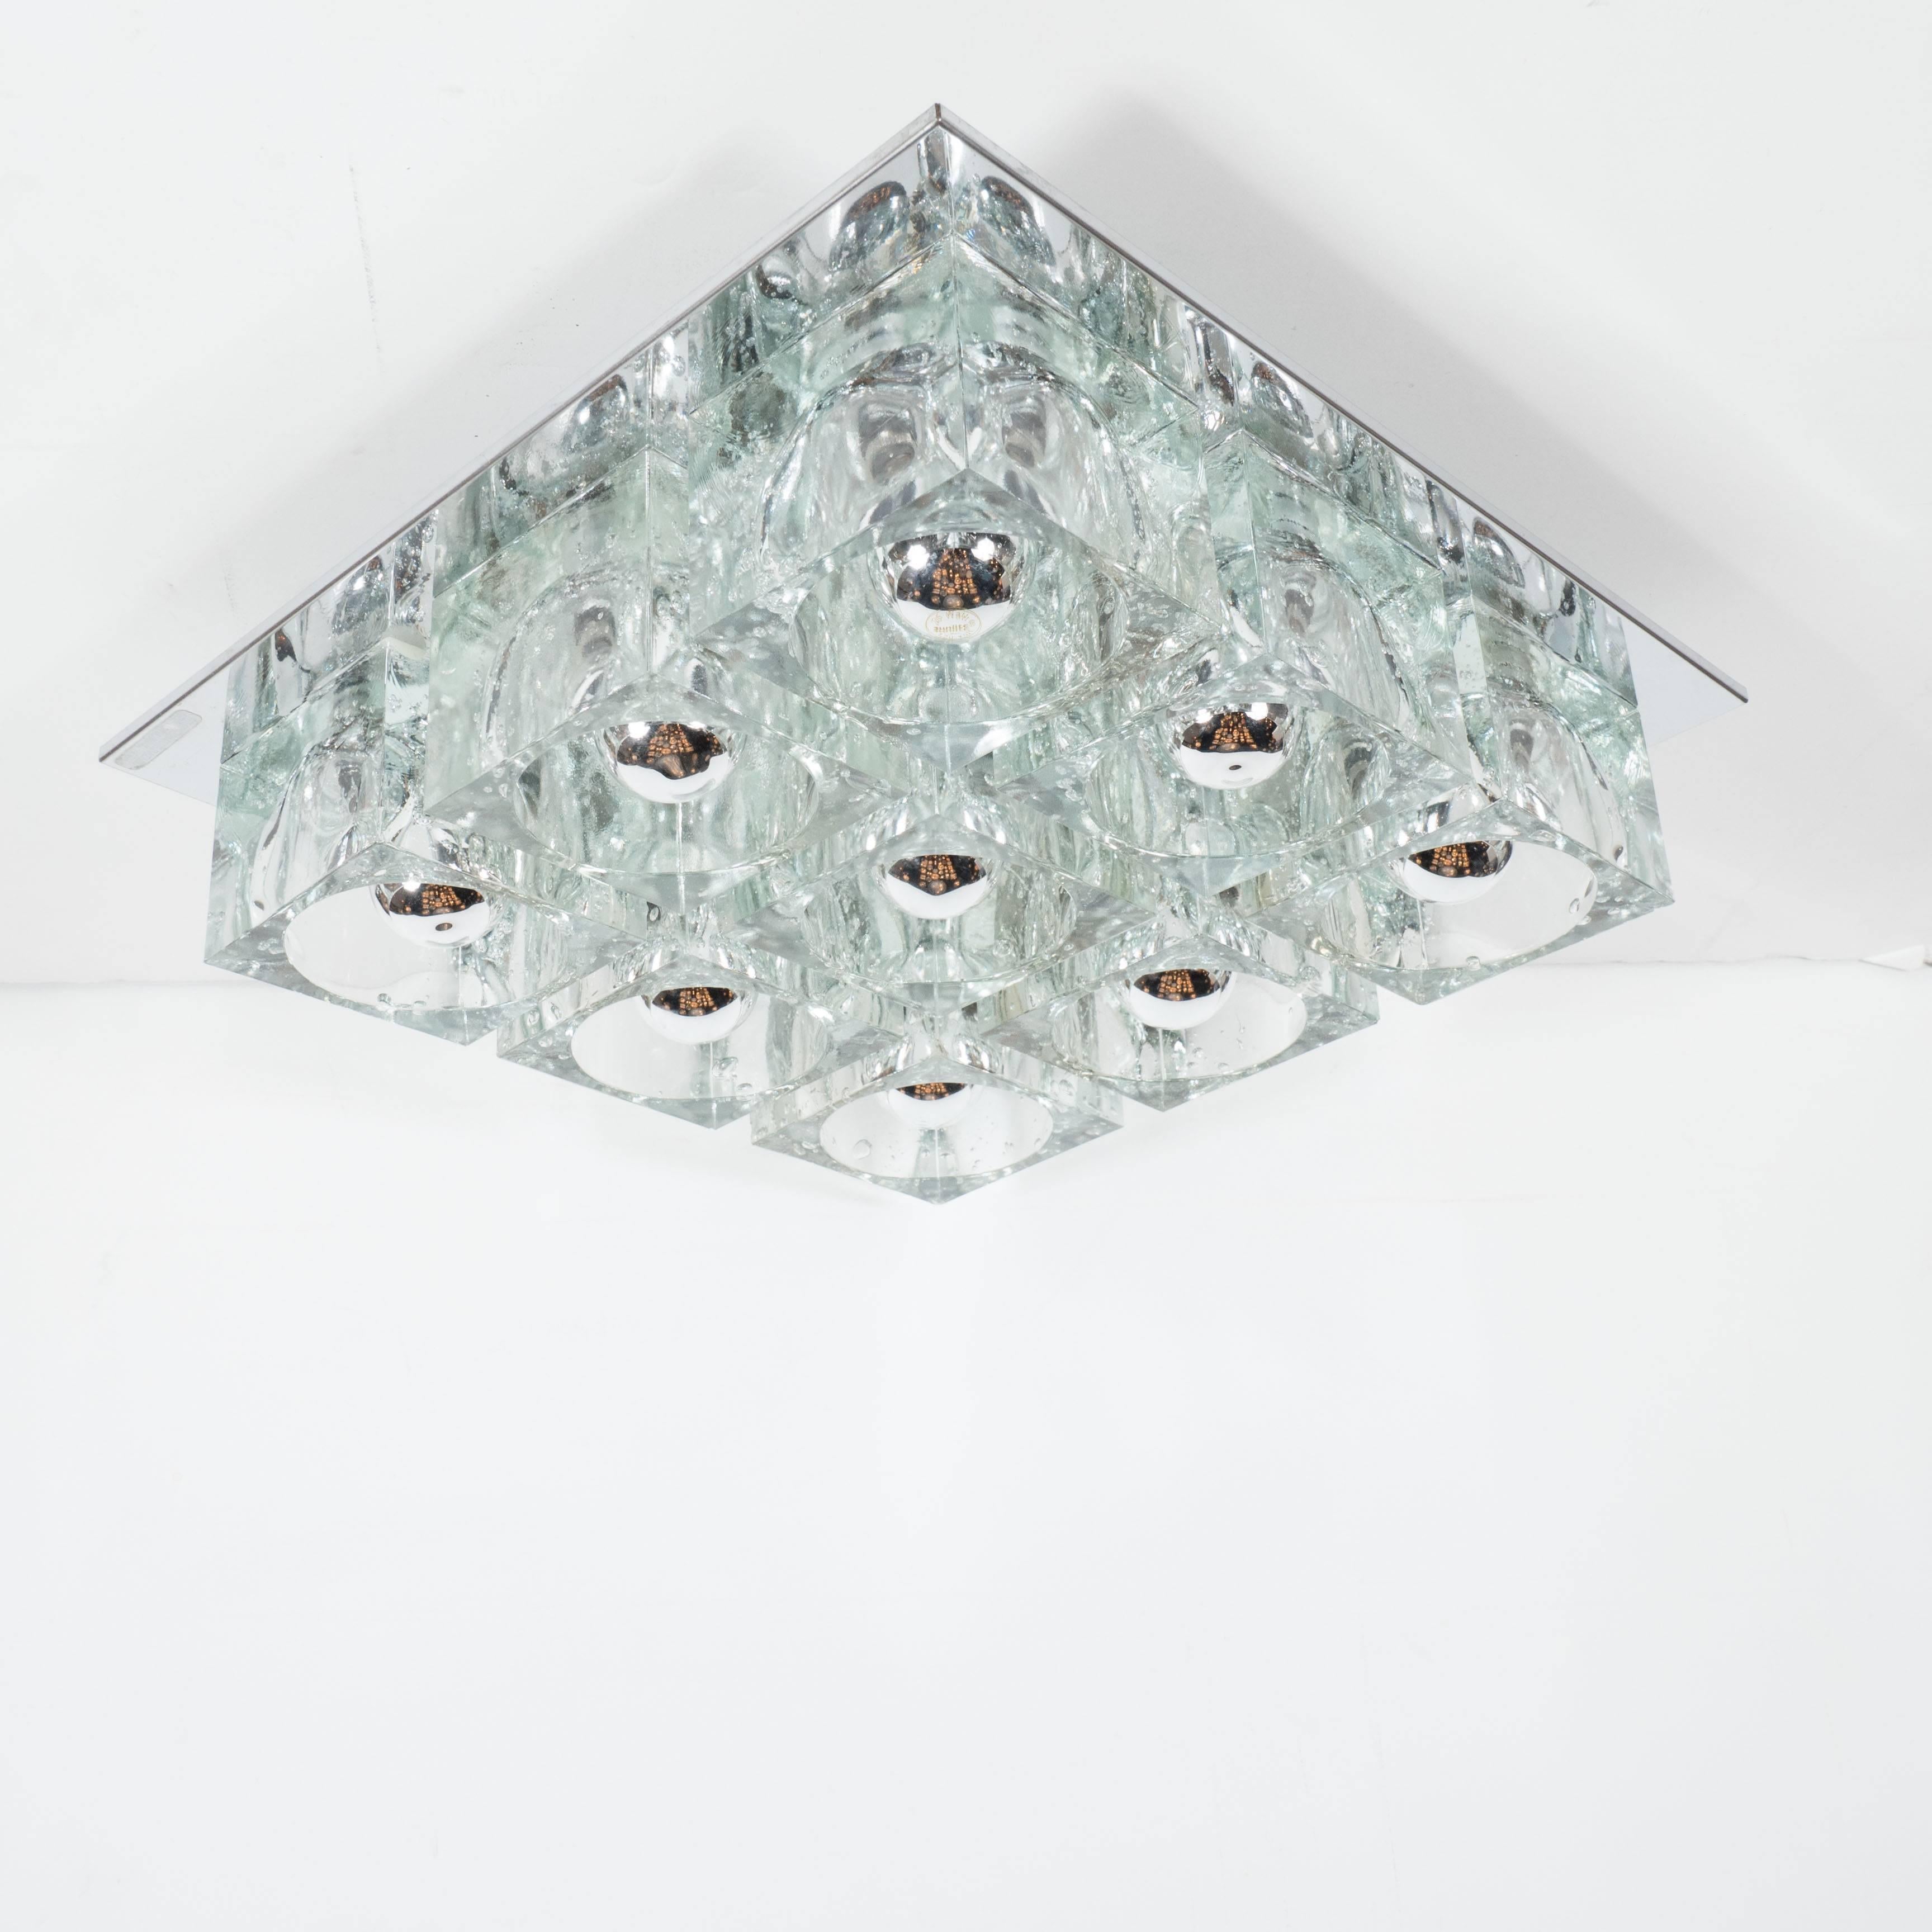 This brilliant Mid-Century Modern flush mount chandelier by Sciolari features nine thick clear glass cubes with inset bulbs fixed to a close fitting chrome backplate. The design has strong geometric qualities with the cubes of the glass strongly